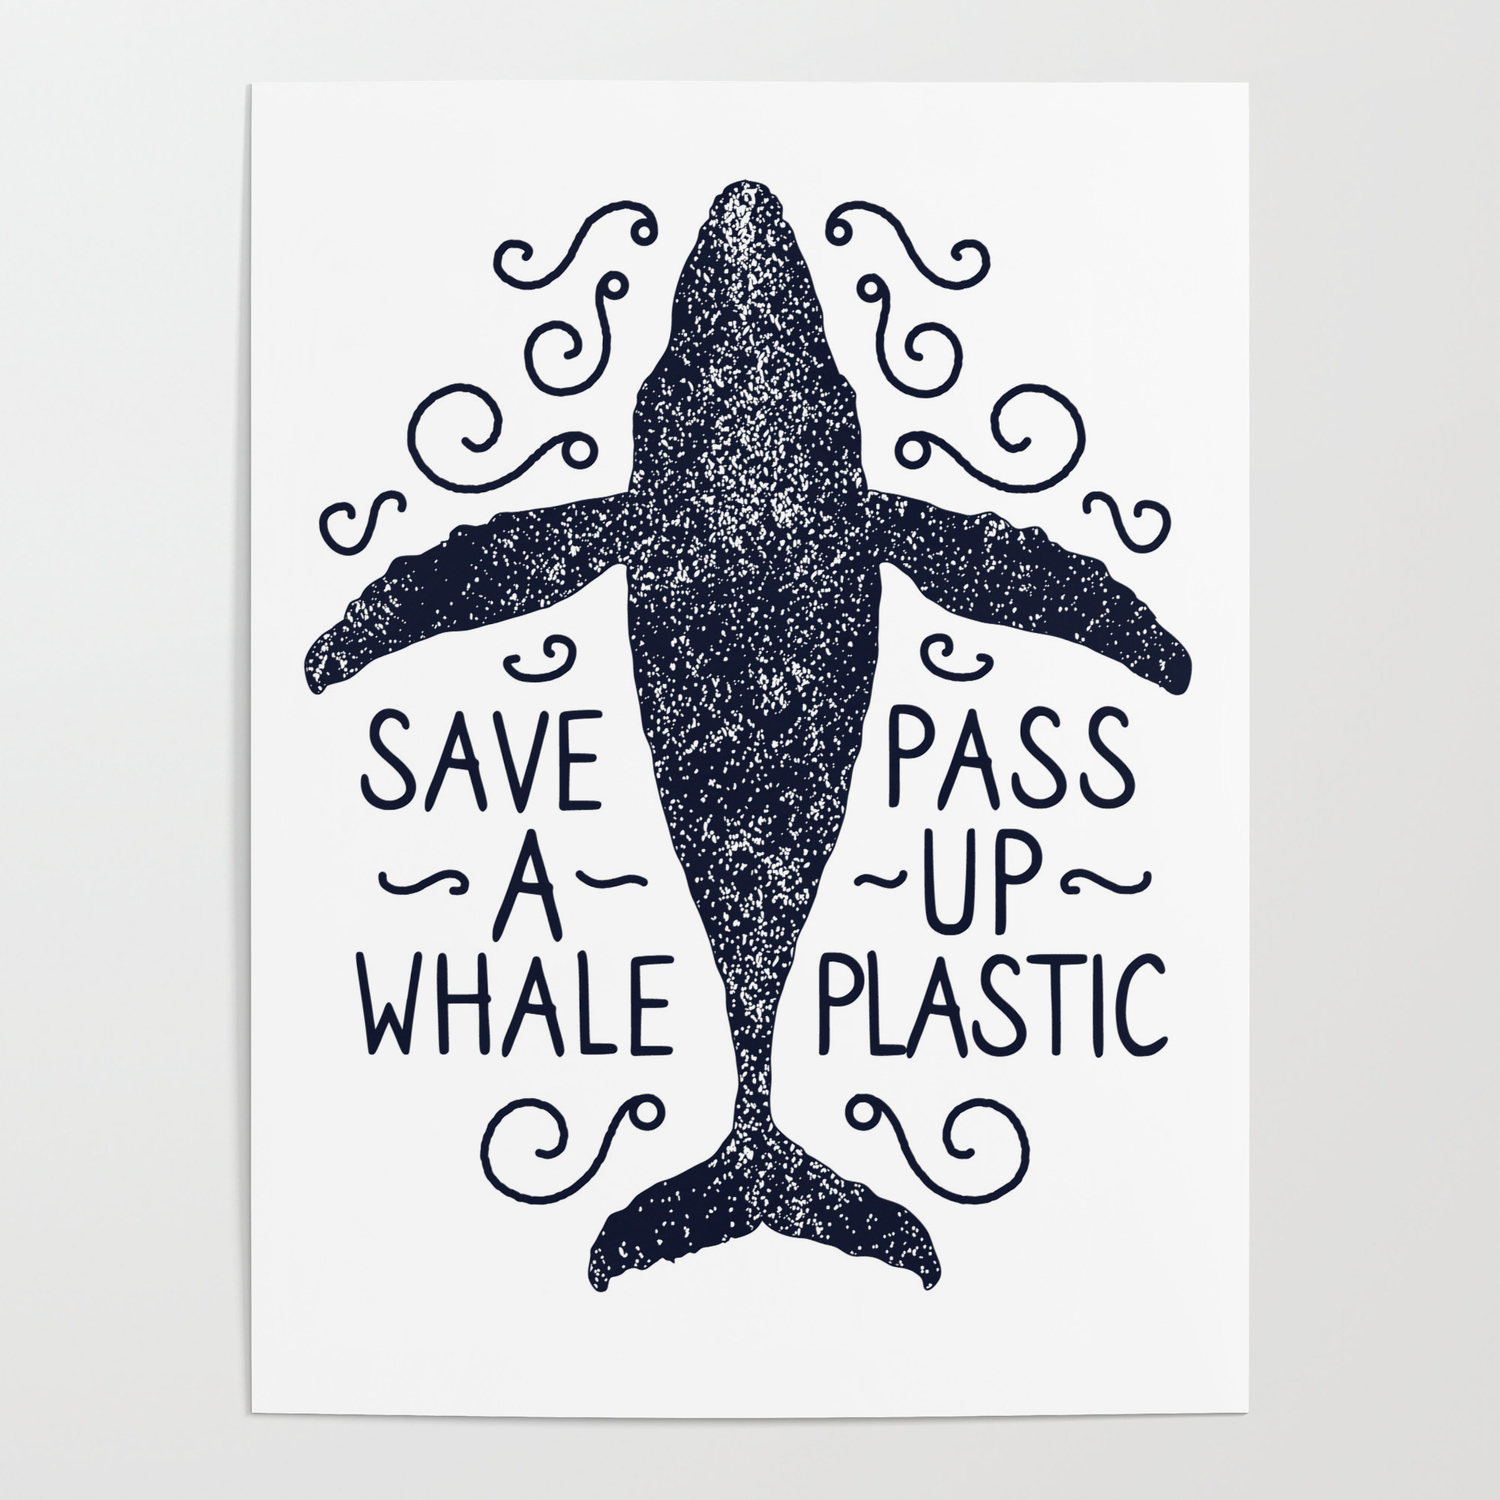 Anti Plastic Save A Whale Pass Up Plastic Poster by bangtees | Society6